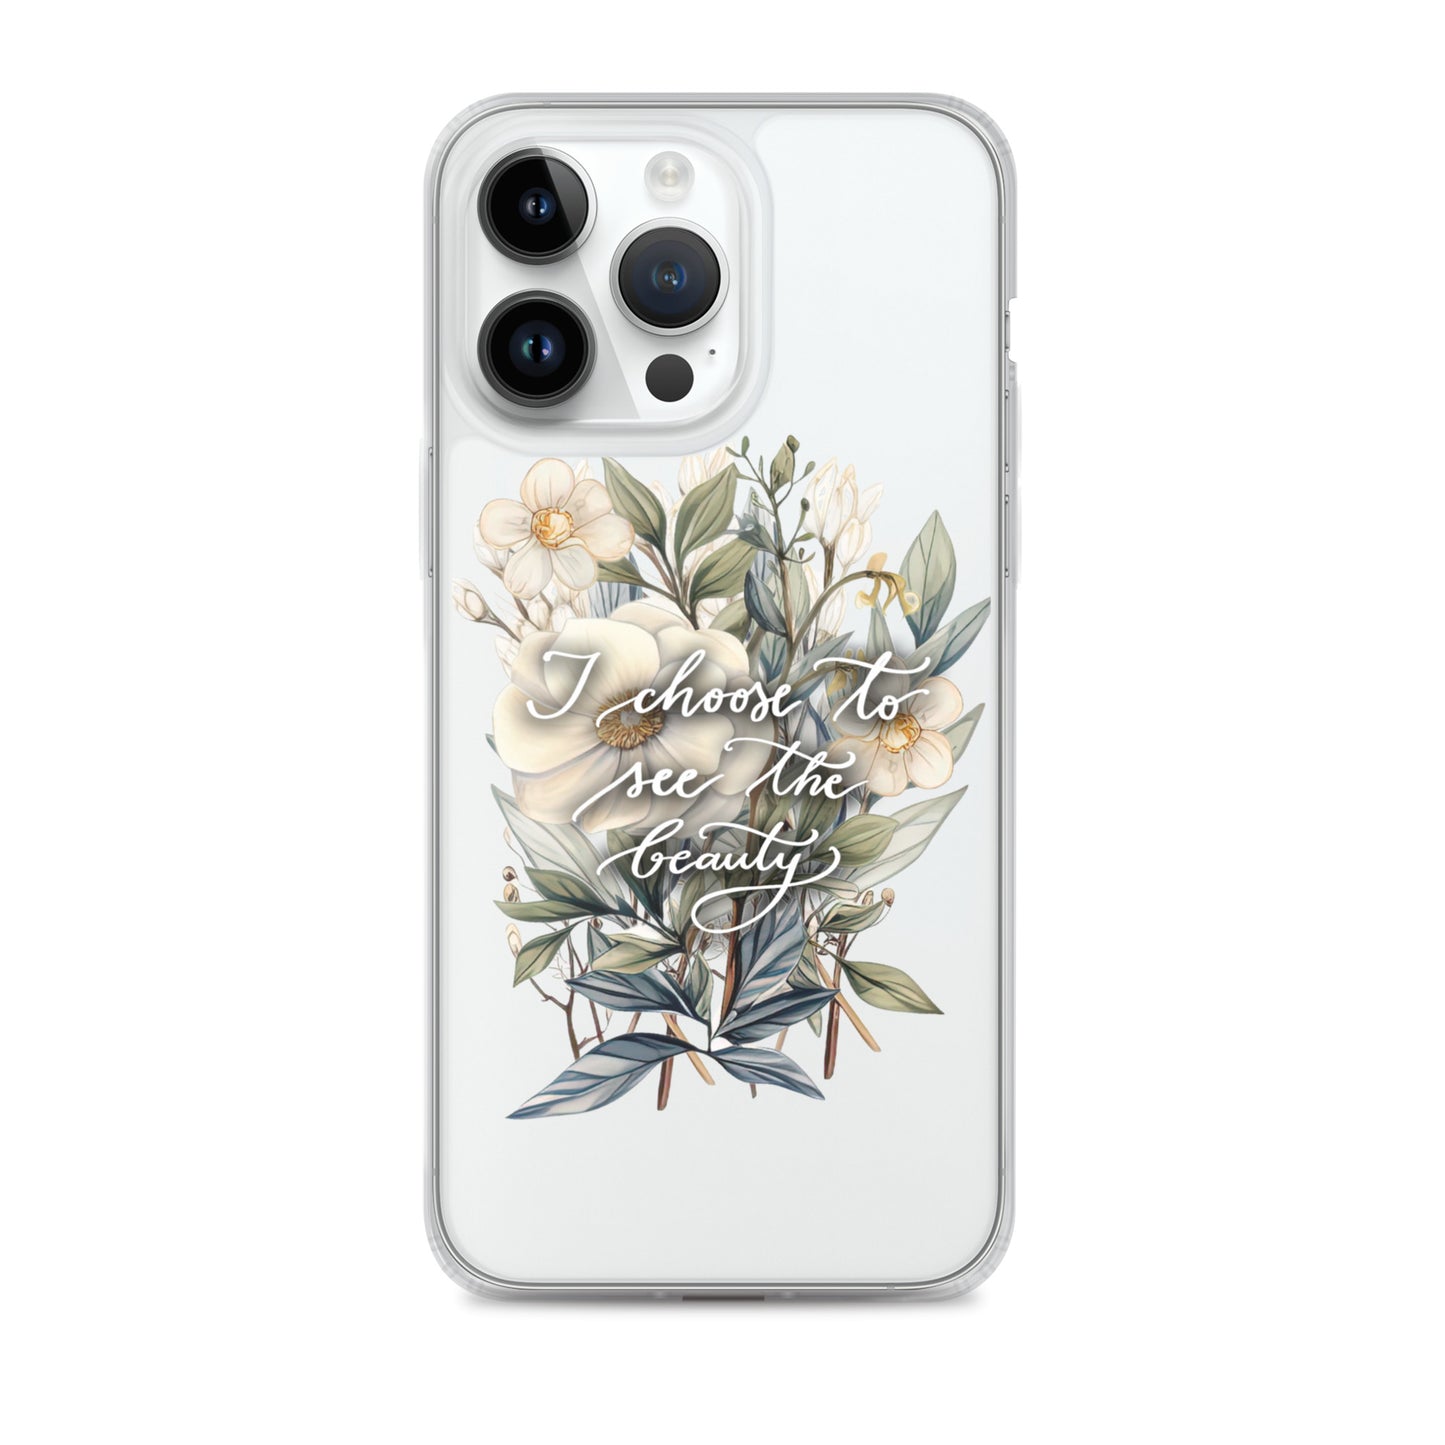 Clear Case for iPhone® "I choose to see the beauty - elegant flowers"